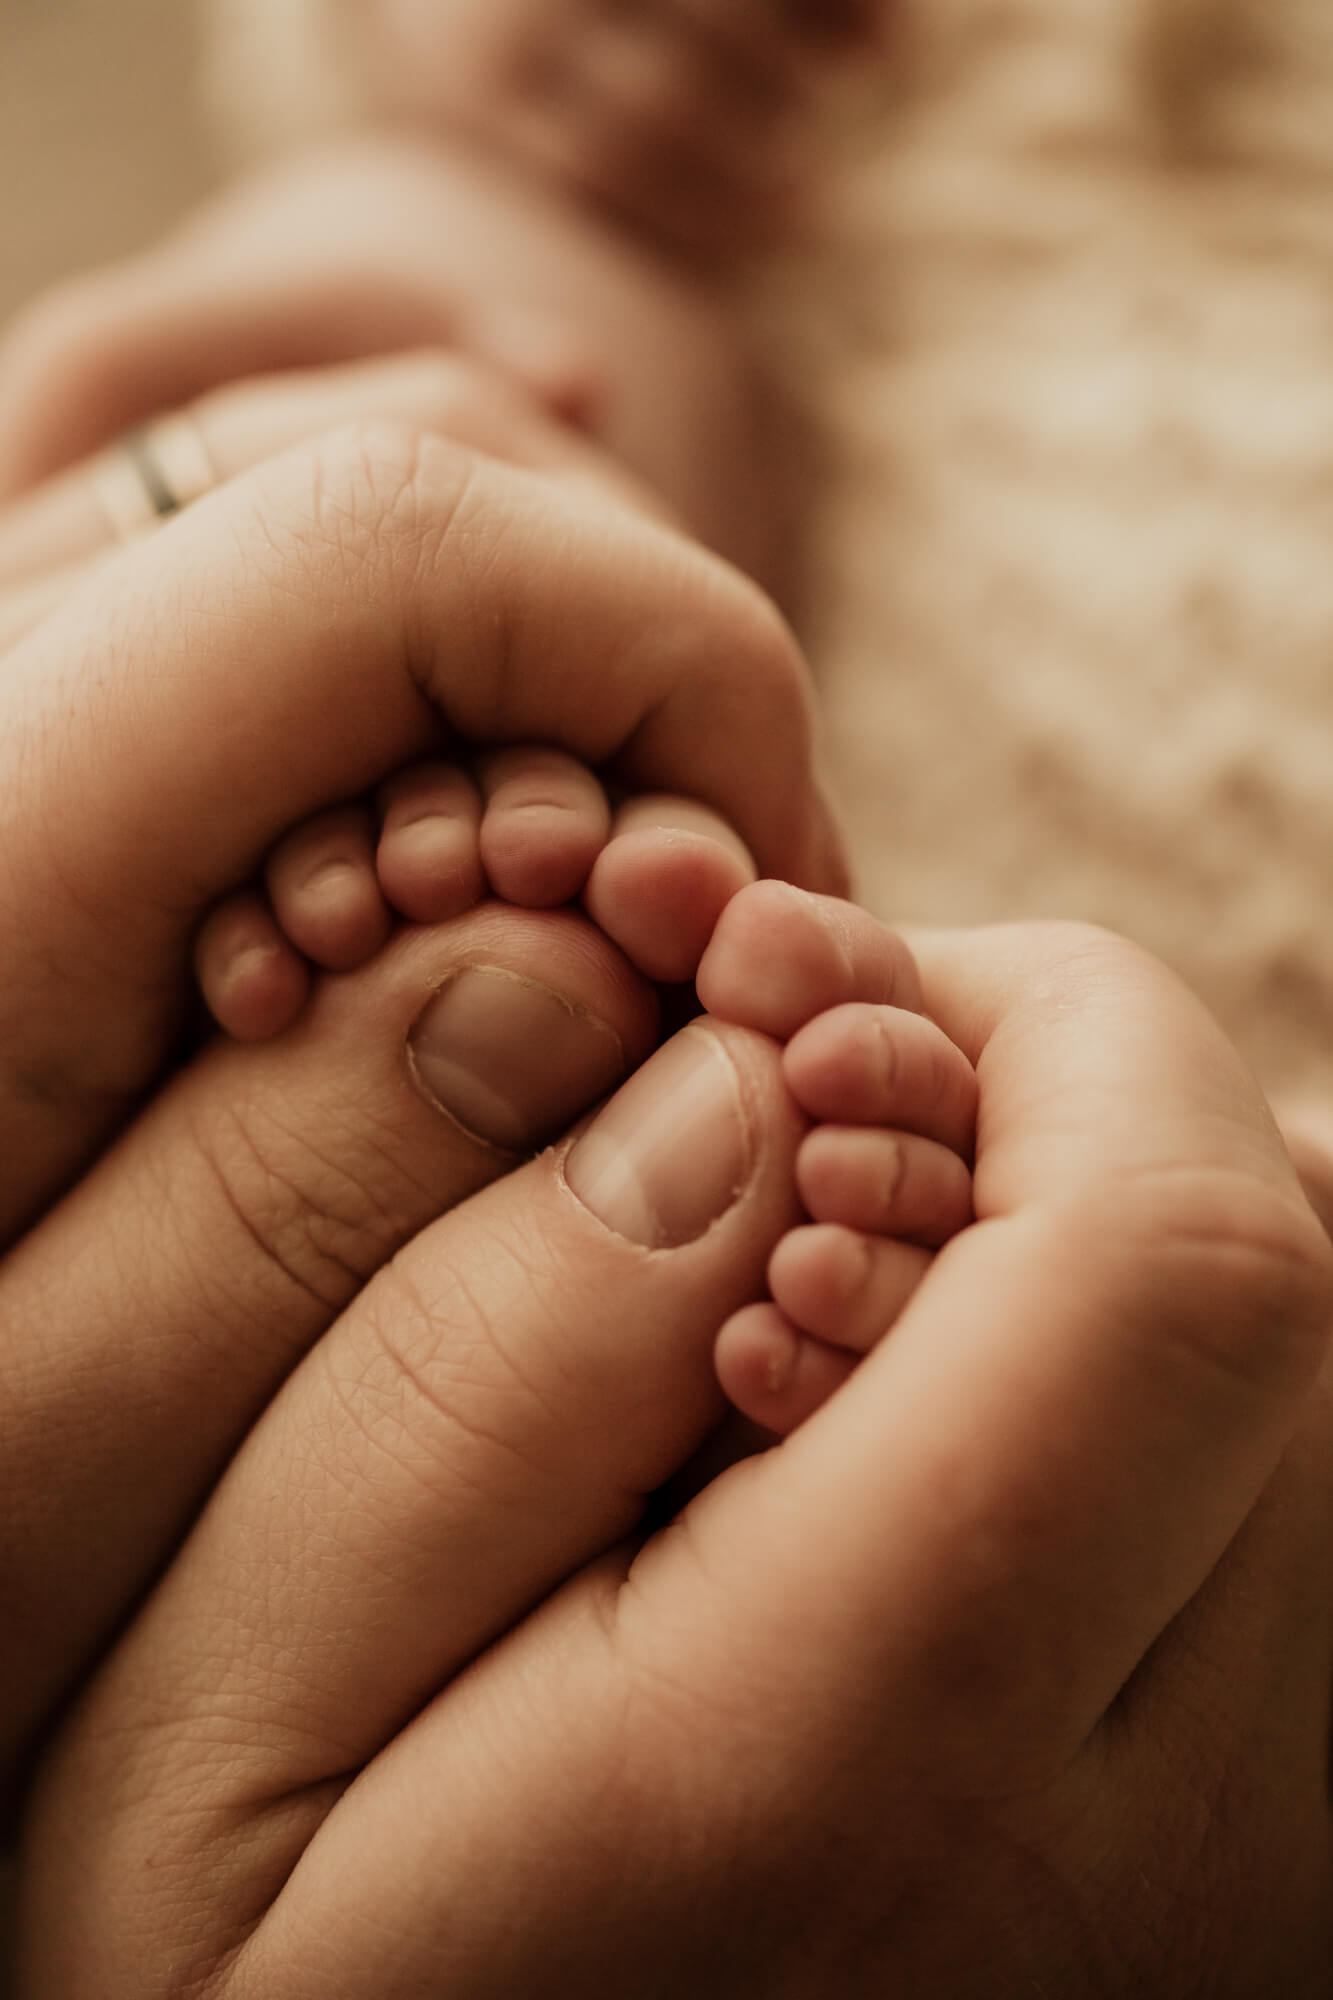 Baby girl feet held by her father's hands.